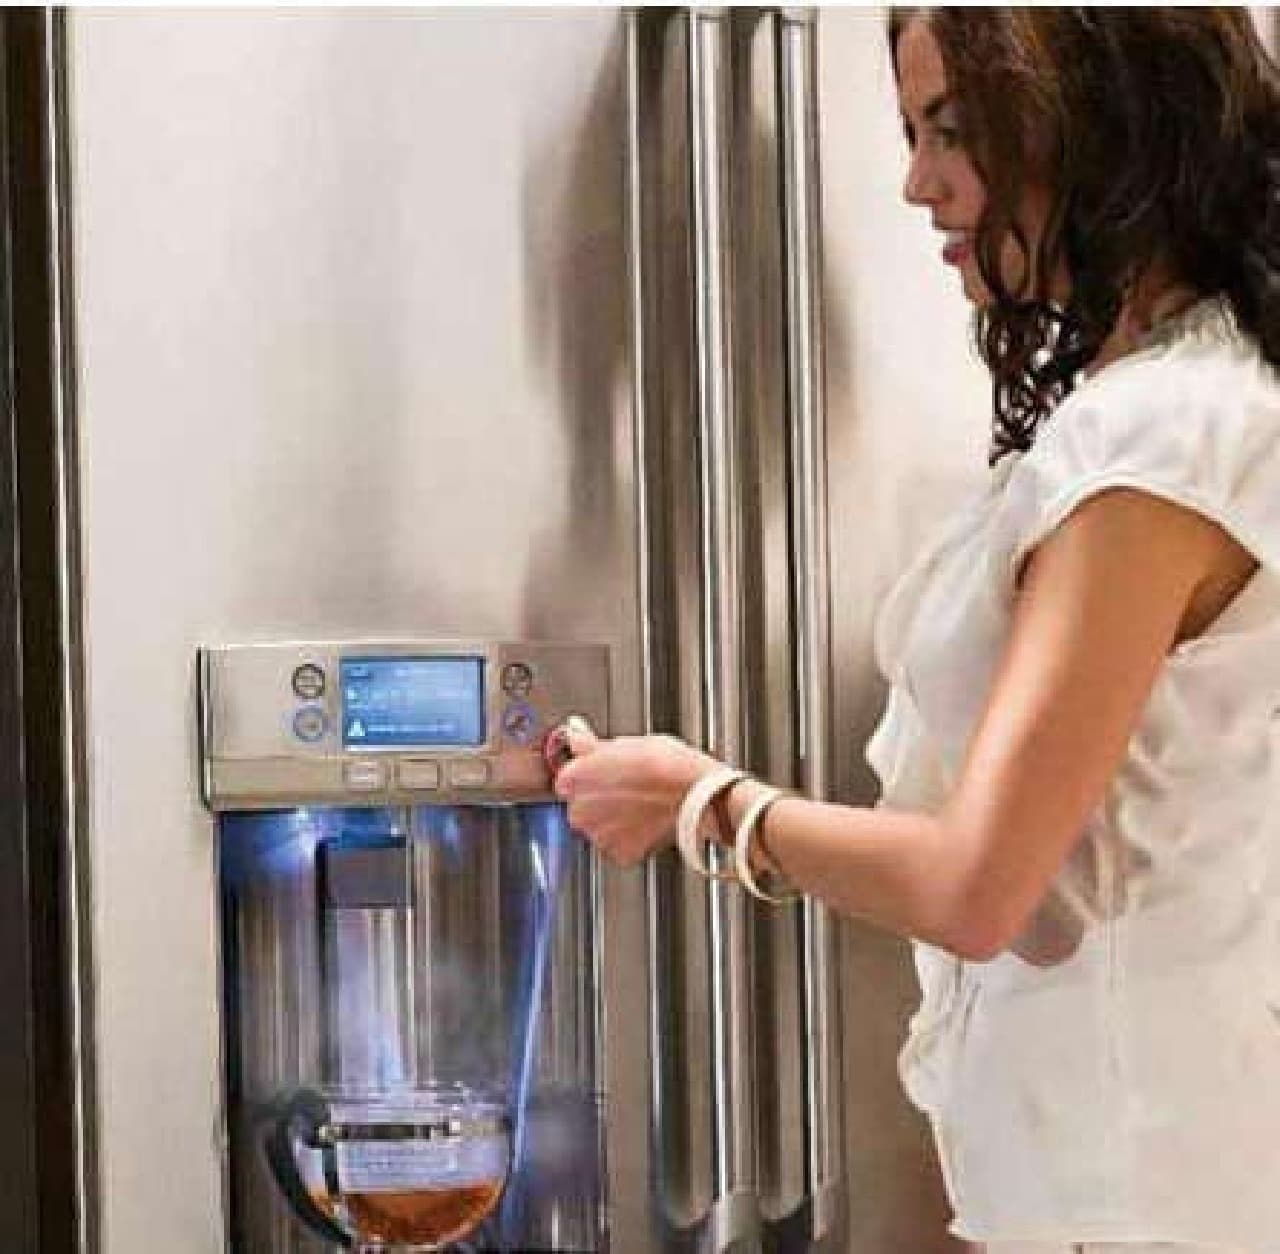 The world's first refrigerator that can boil water "French Door Refrigerator with Hot Water Dispenser"